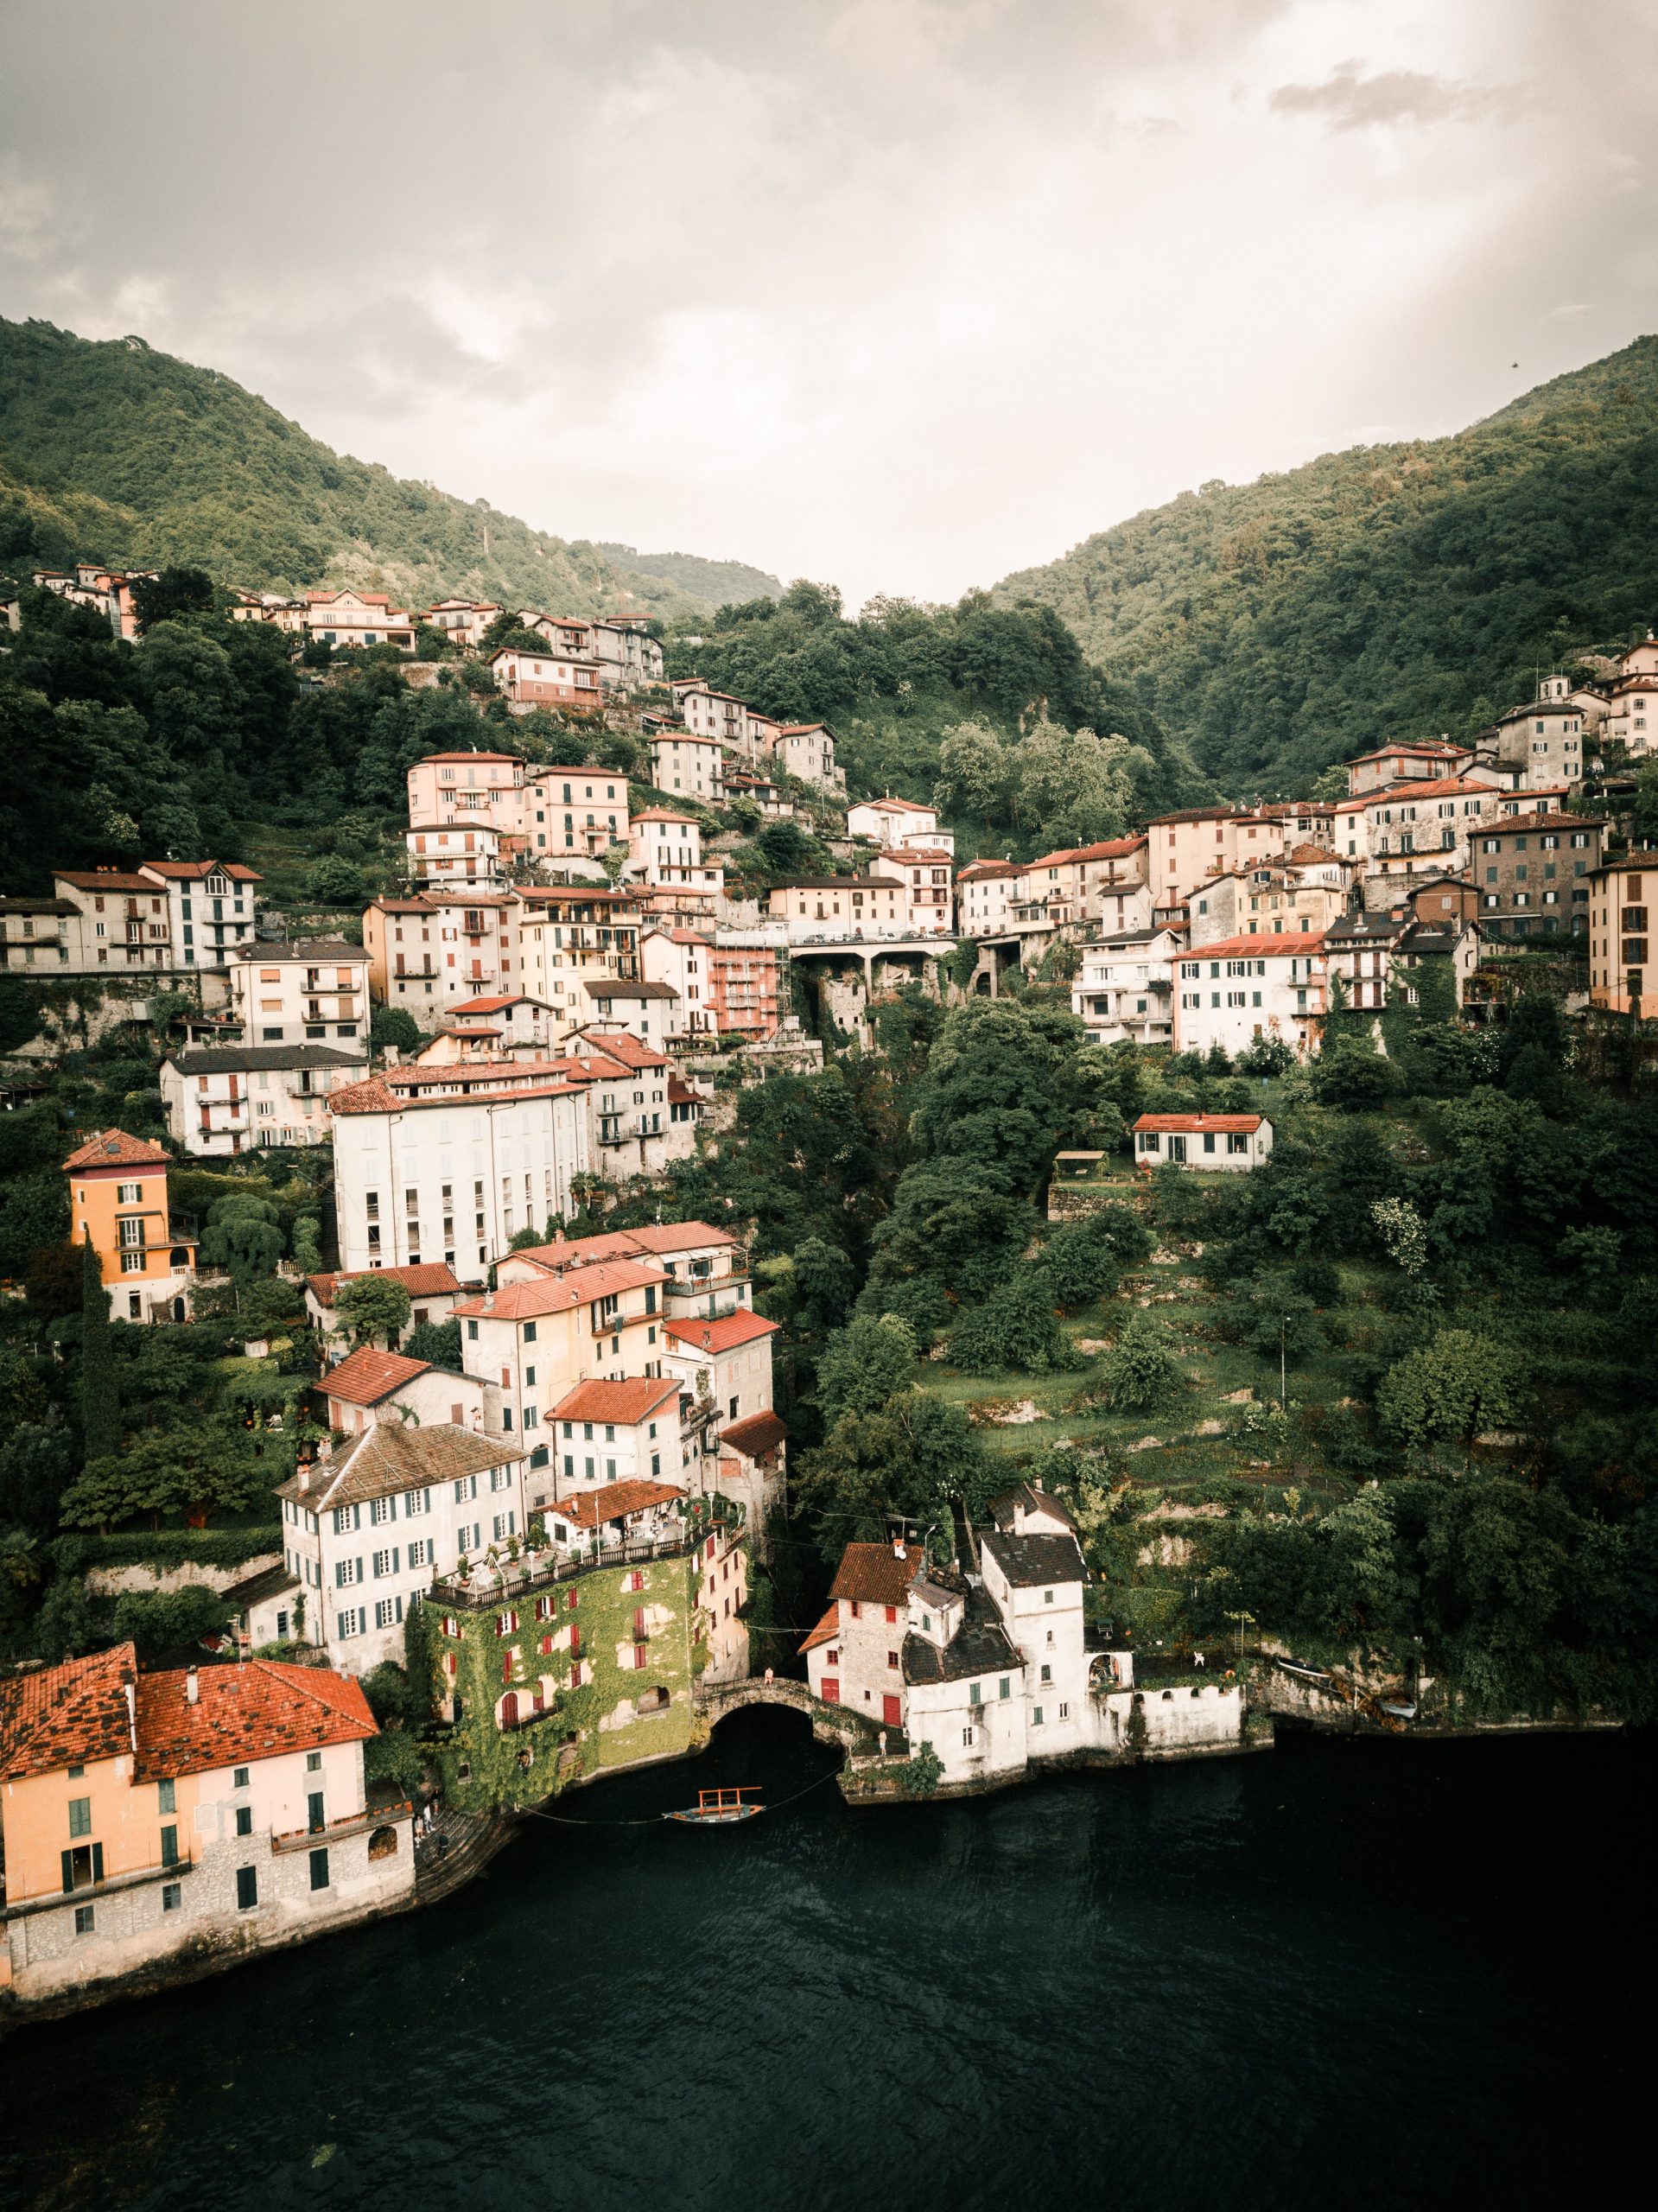 A hillside town with terracotta roofed buildings and a lush gorge in the middle running down to a lake.